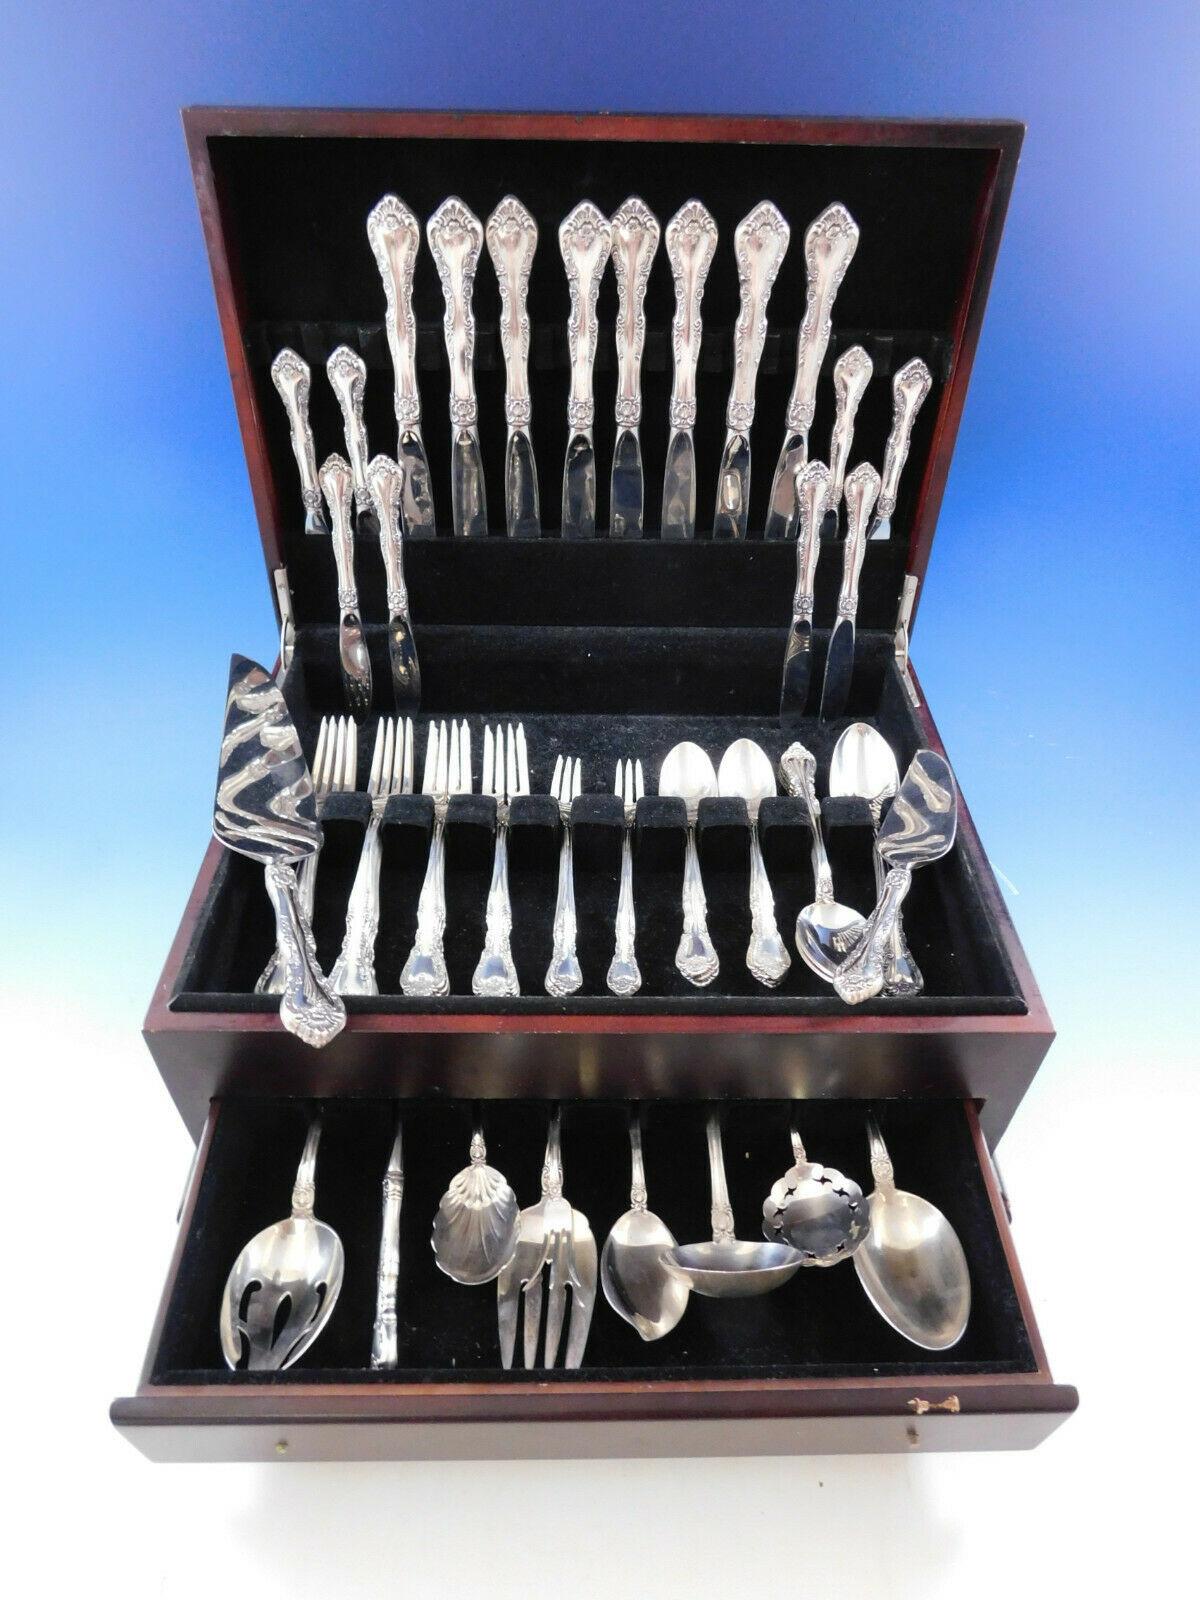 Alencon Lace by Gorham circa 1965 sterling silver flatware set - 67 pieces. This lovely pattern is adorned with a delicate border of design, similar to that of fine lace. This set includes:

8 knives, 9 1/8